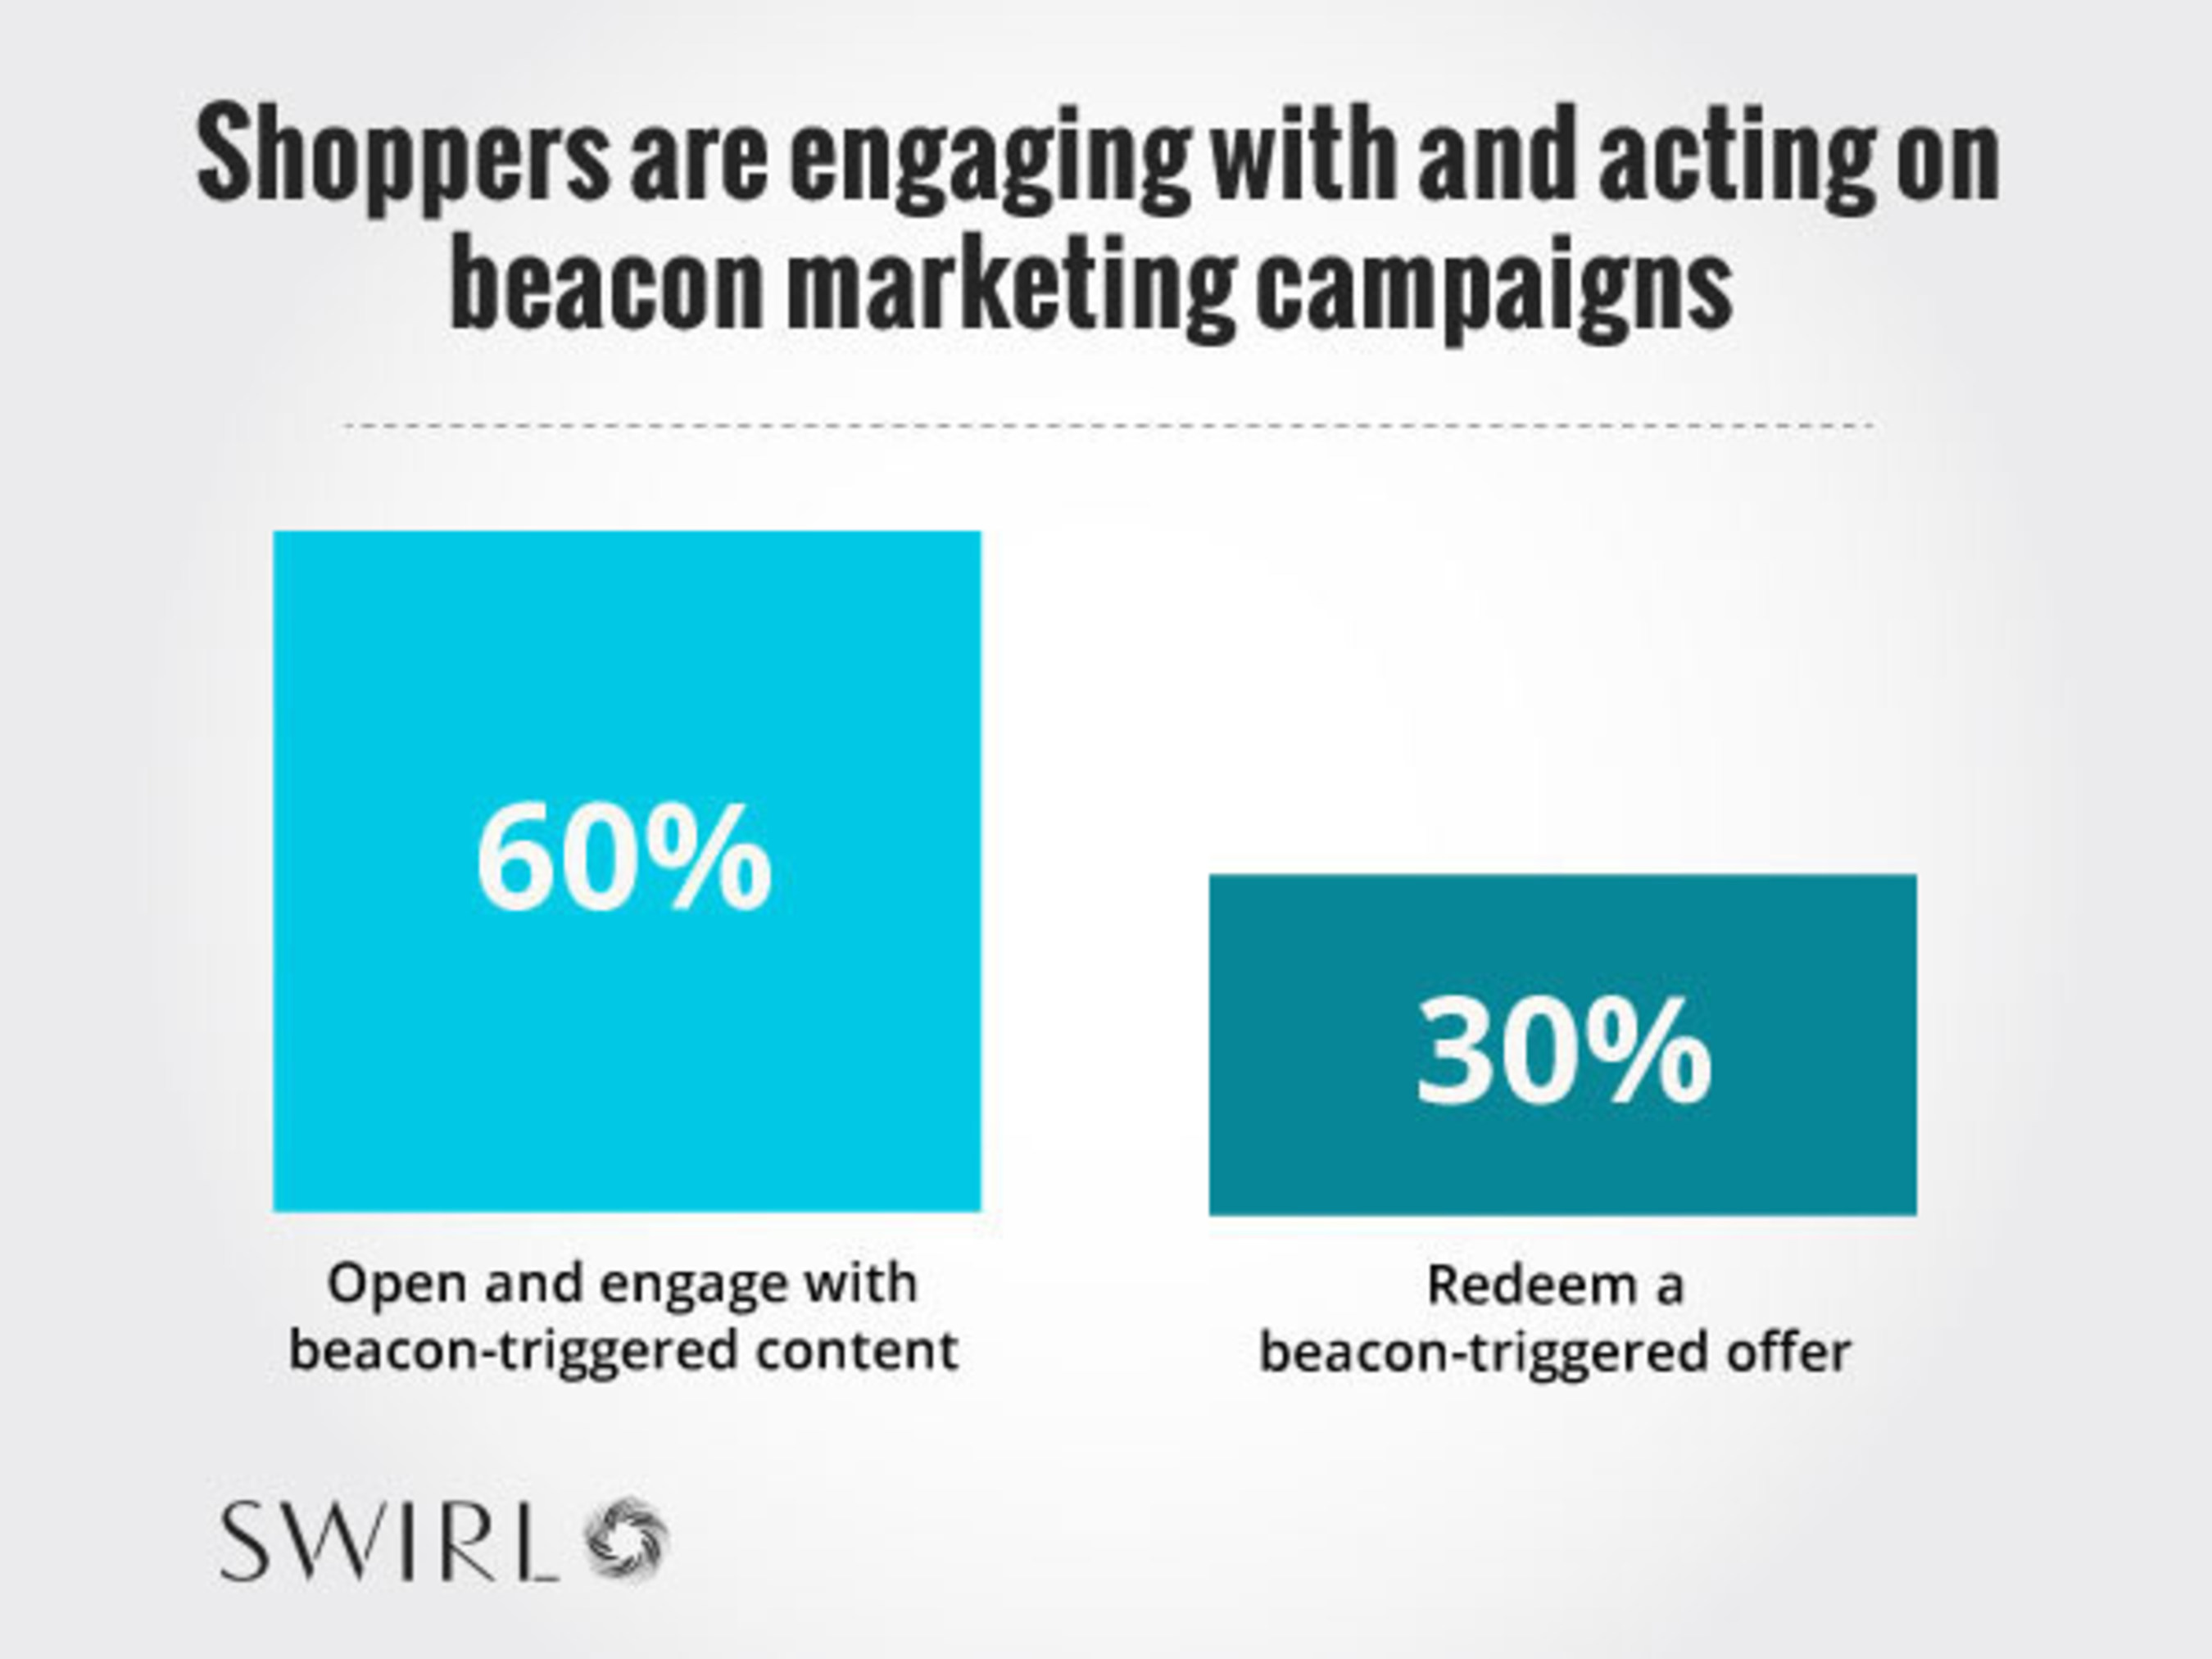 Shoppers are engaging with and acting on beacon marketing campaigns